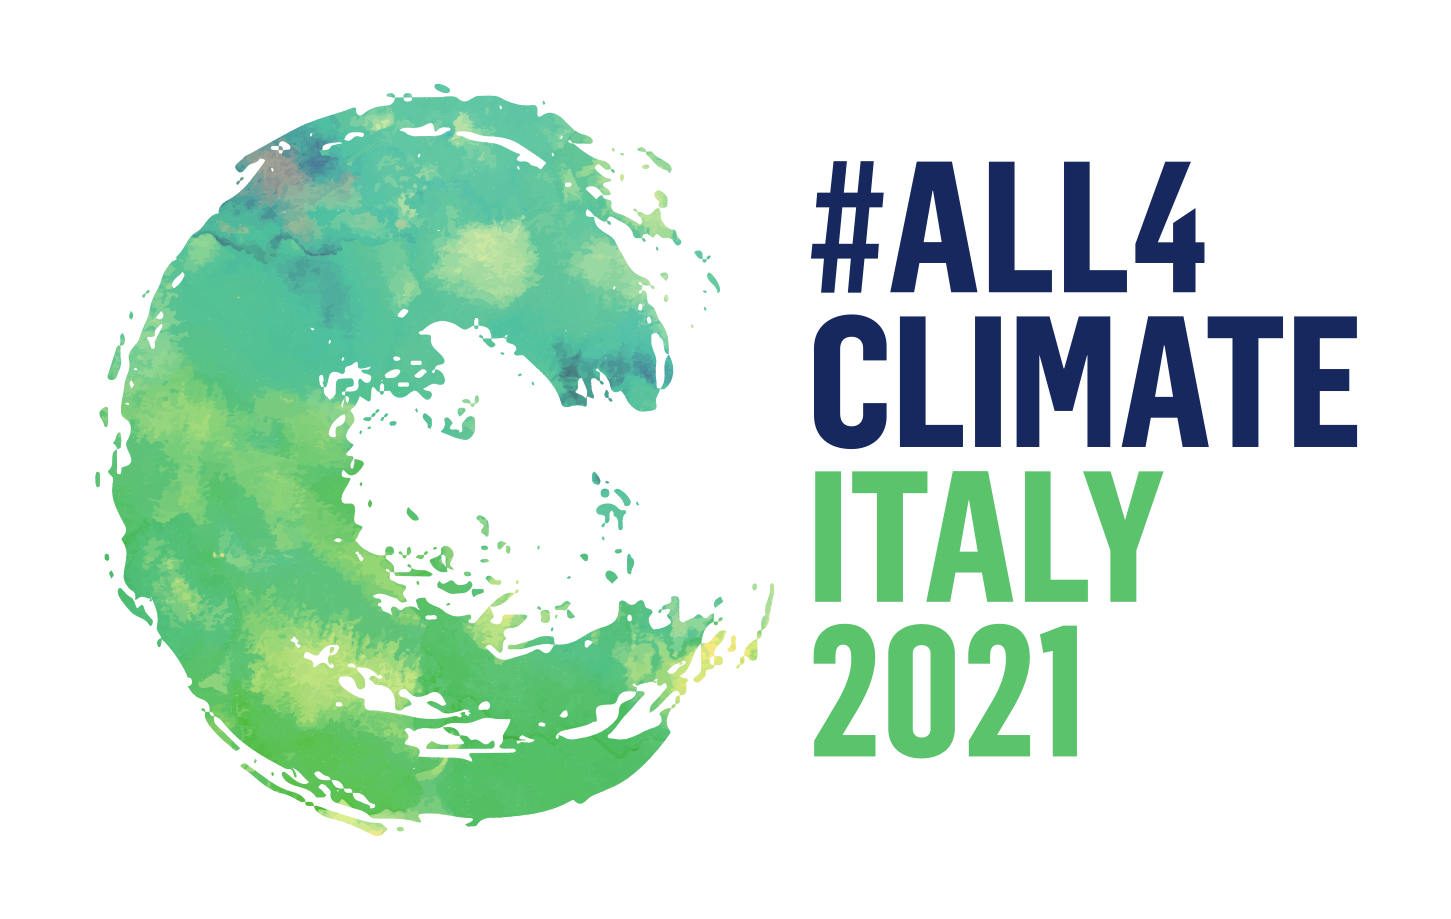 All4Climate showcases ideas, projects and initiatives on climate change in the lead up to the Youth4Climate and Pre-COP26 in Milan in September